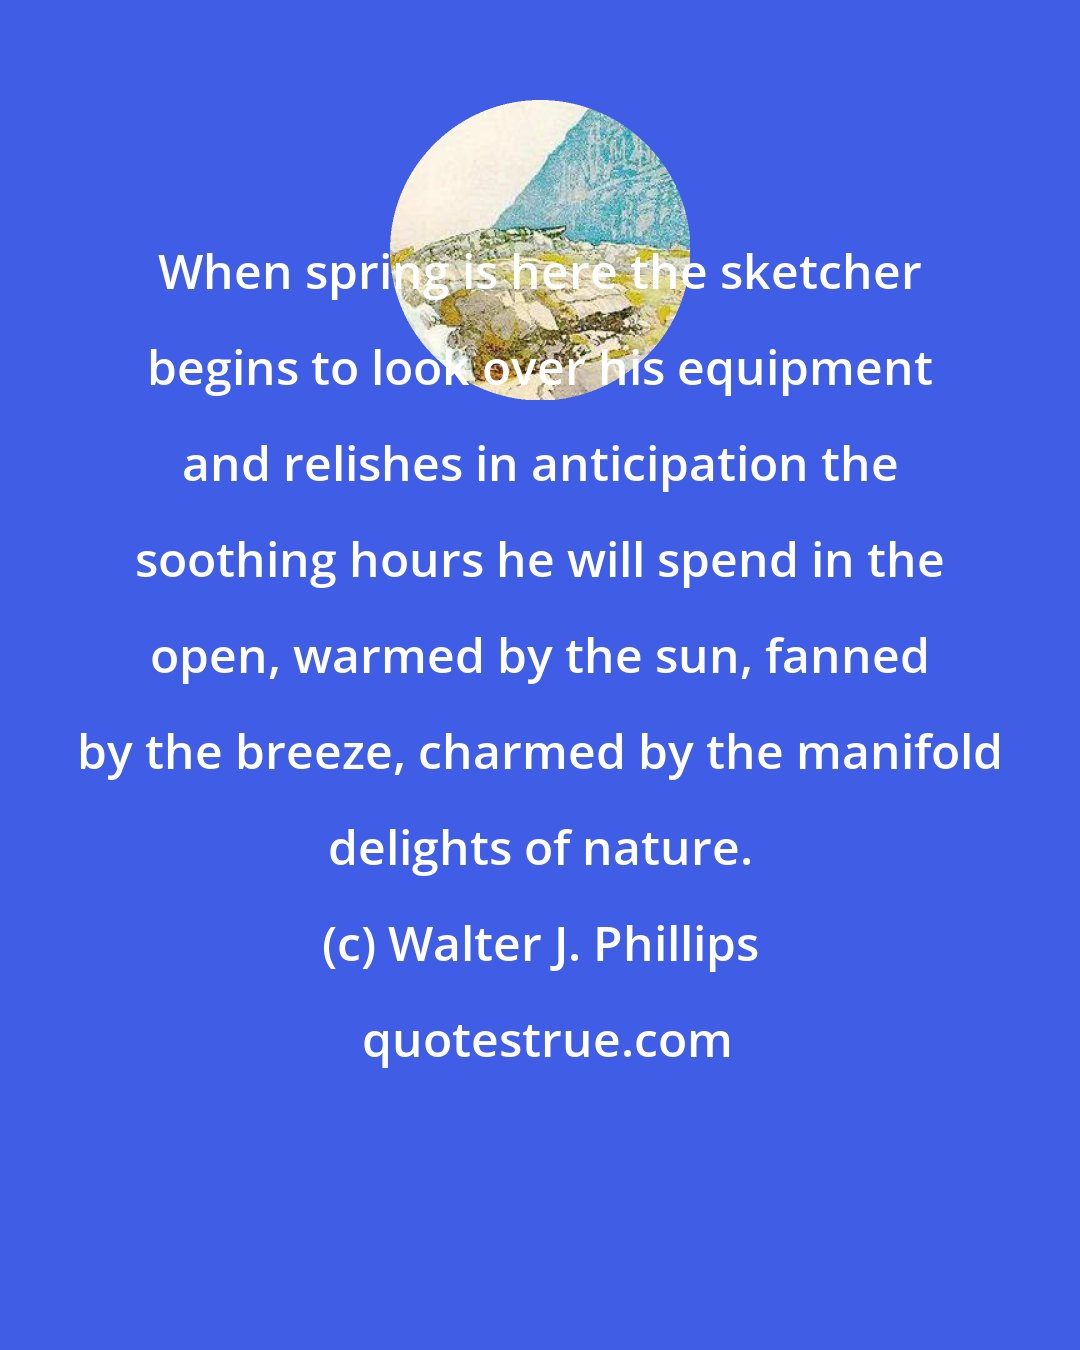 Walter J. Phillips: When spring is here the sketcher begins to look over his equipment and relishes in anticipation the soothing hours he will spend in the open, warmed by the sun, fanned by the breeze, charmed by the manifold delights of nature.